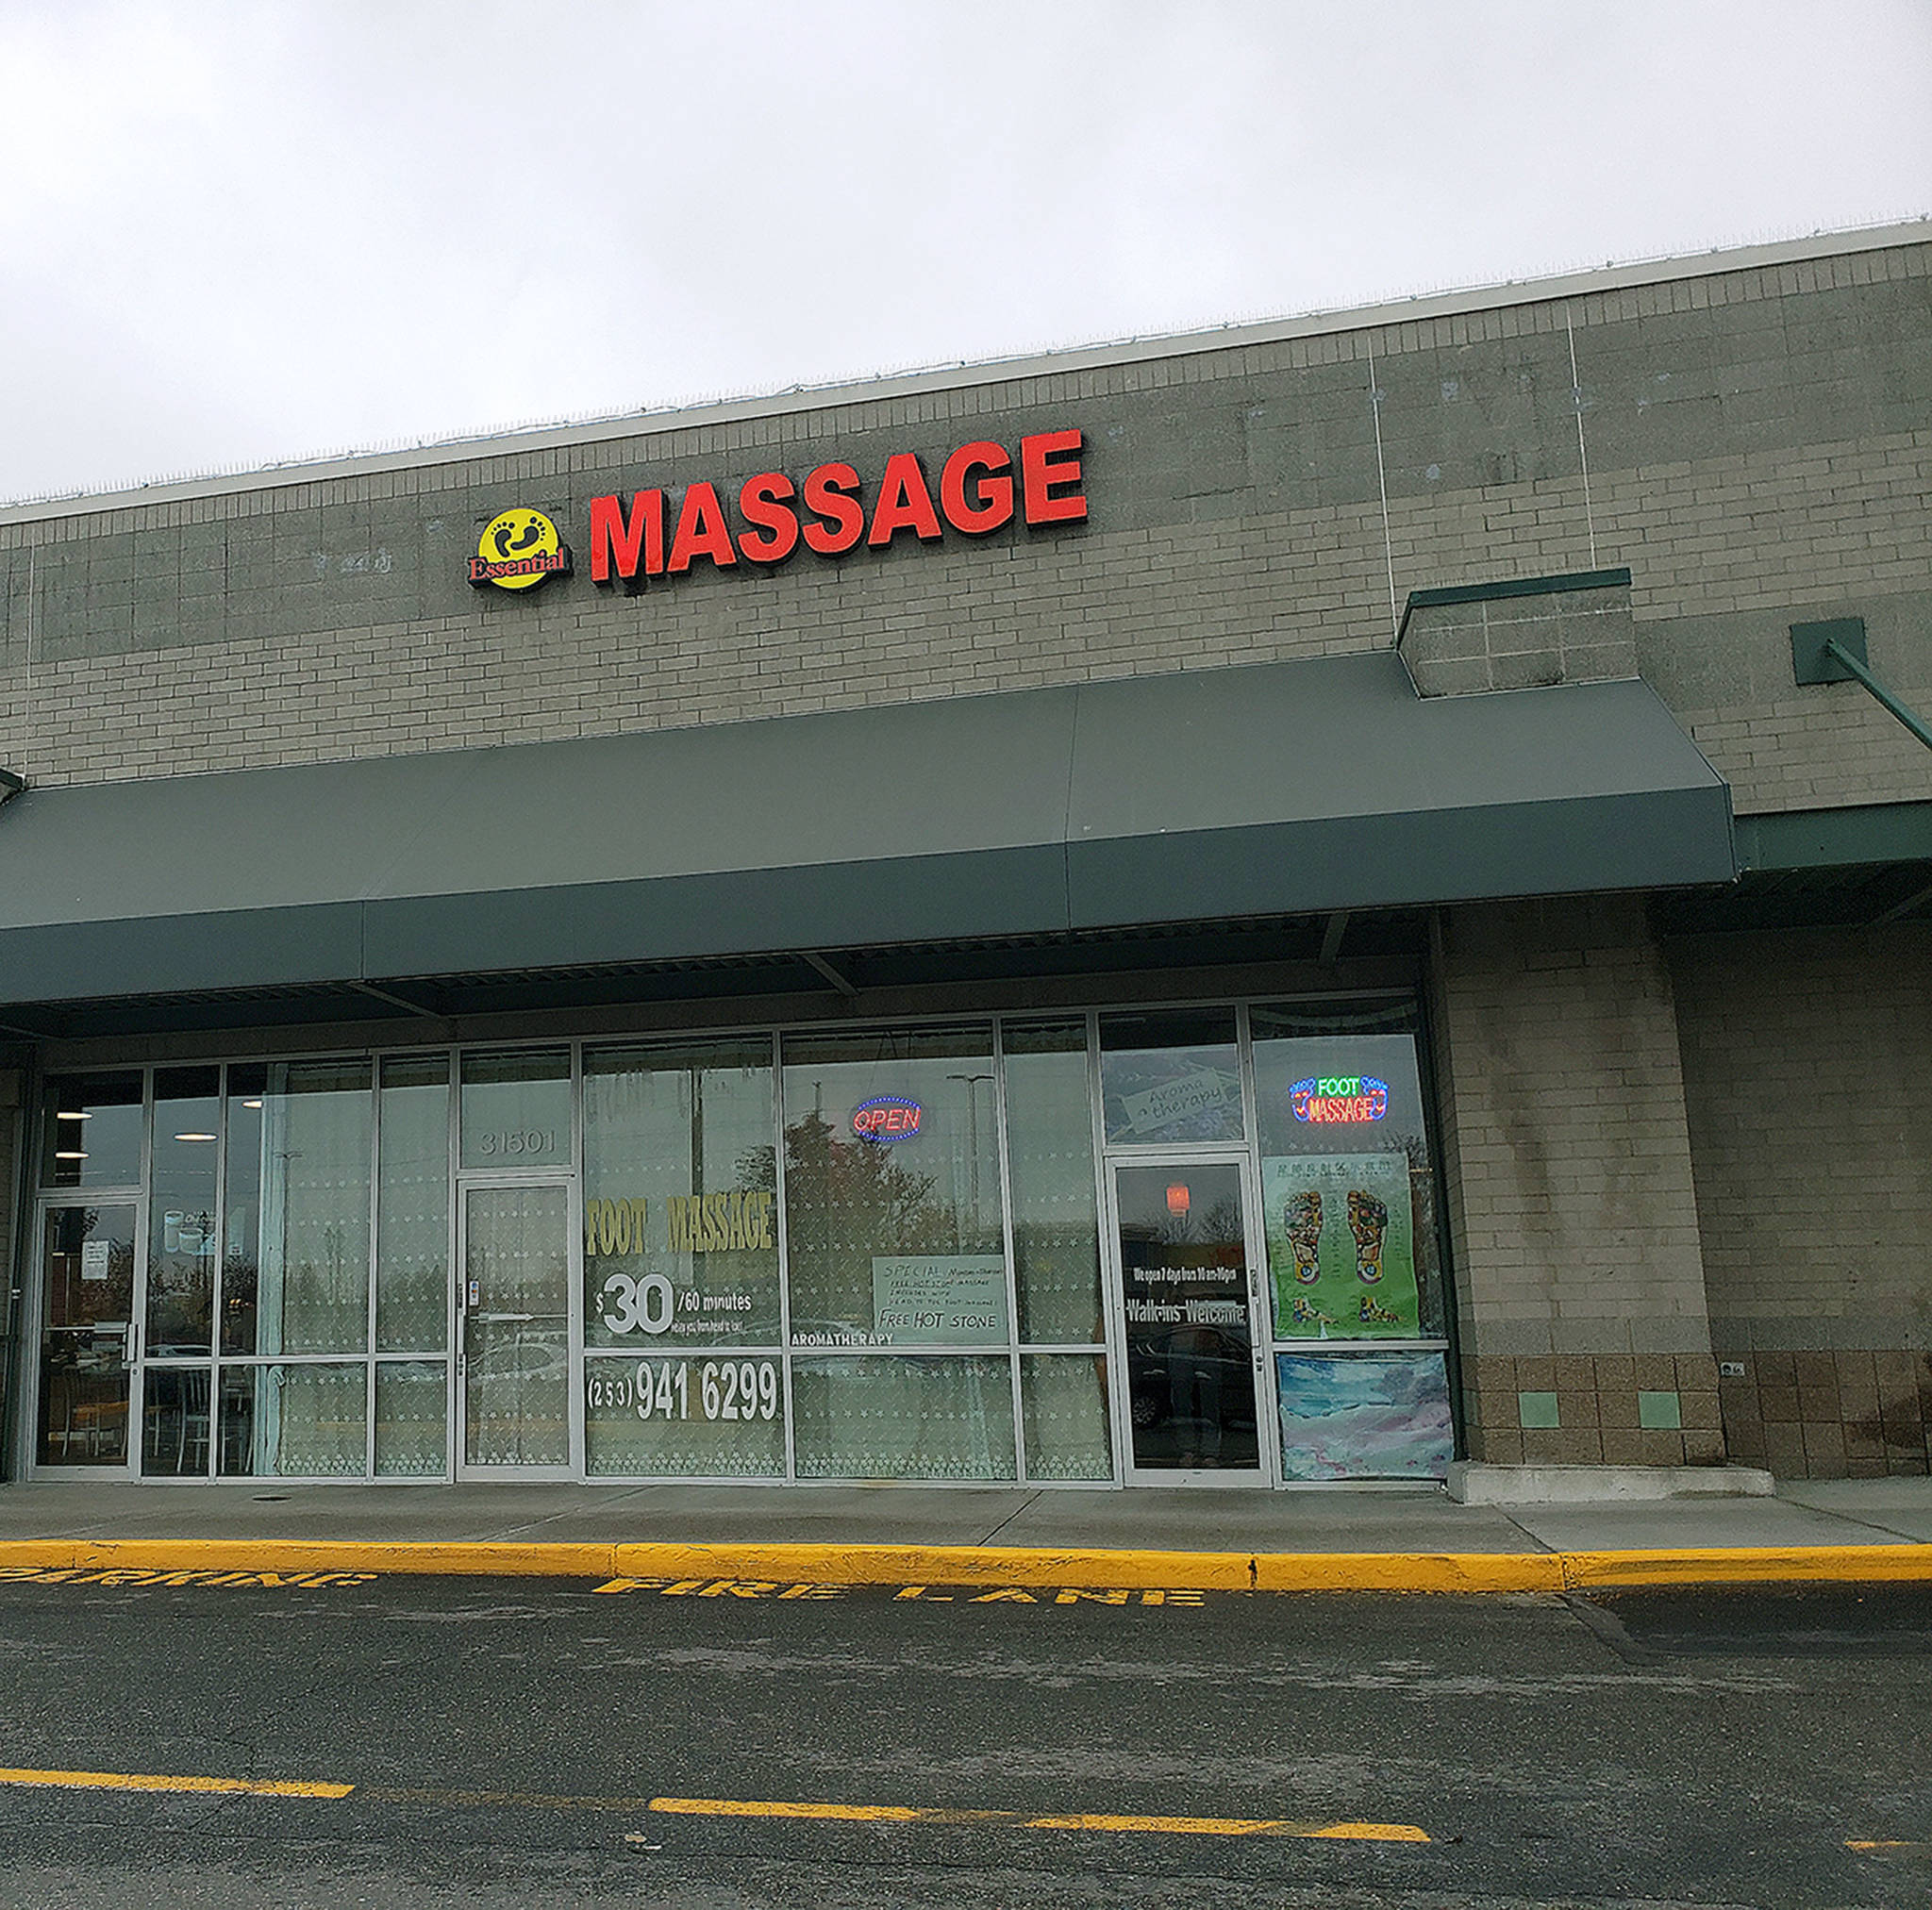 Third alleged sexual assault reported at Federal Way foot massage business in three years